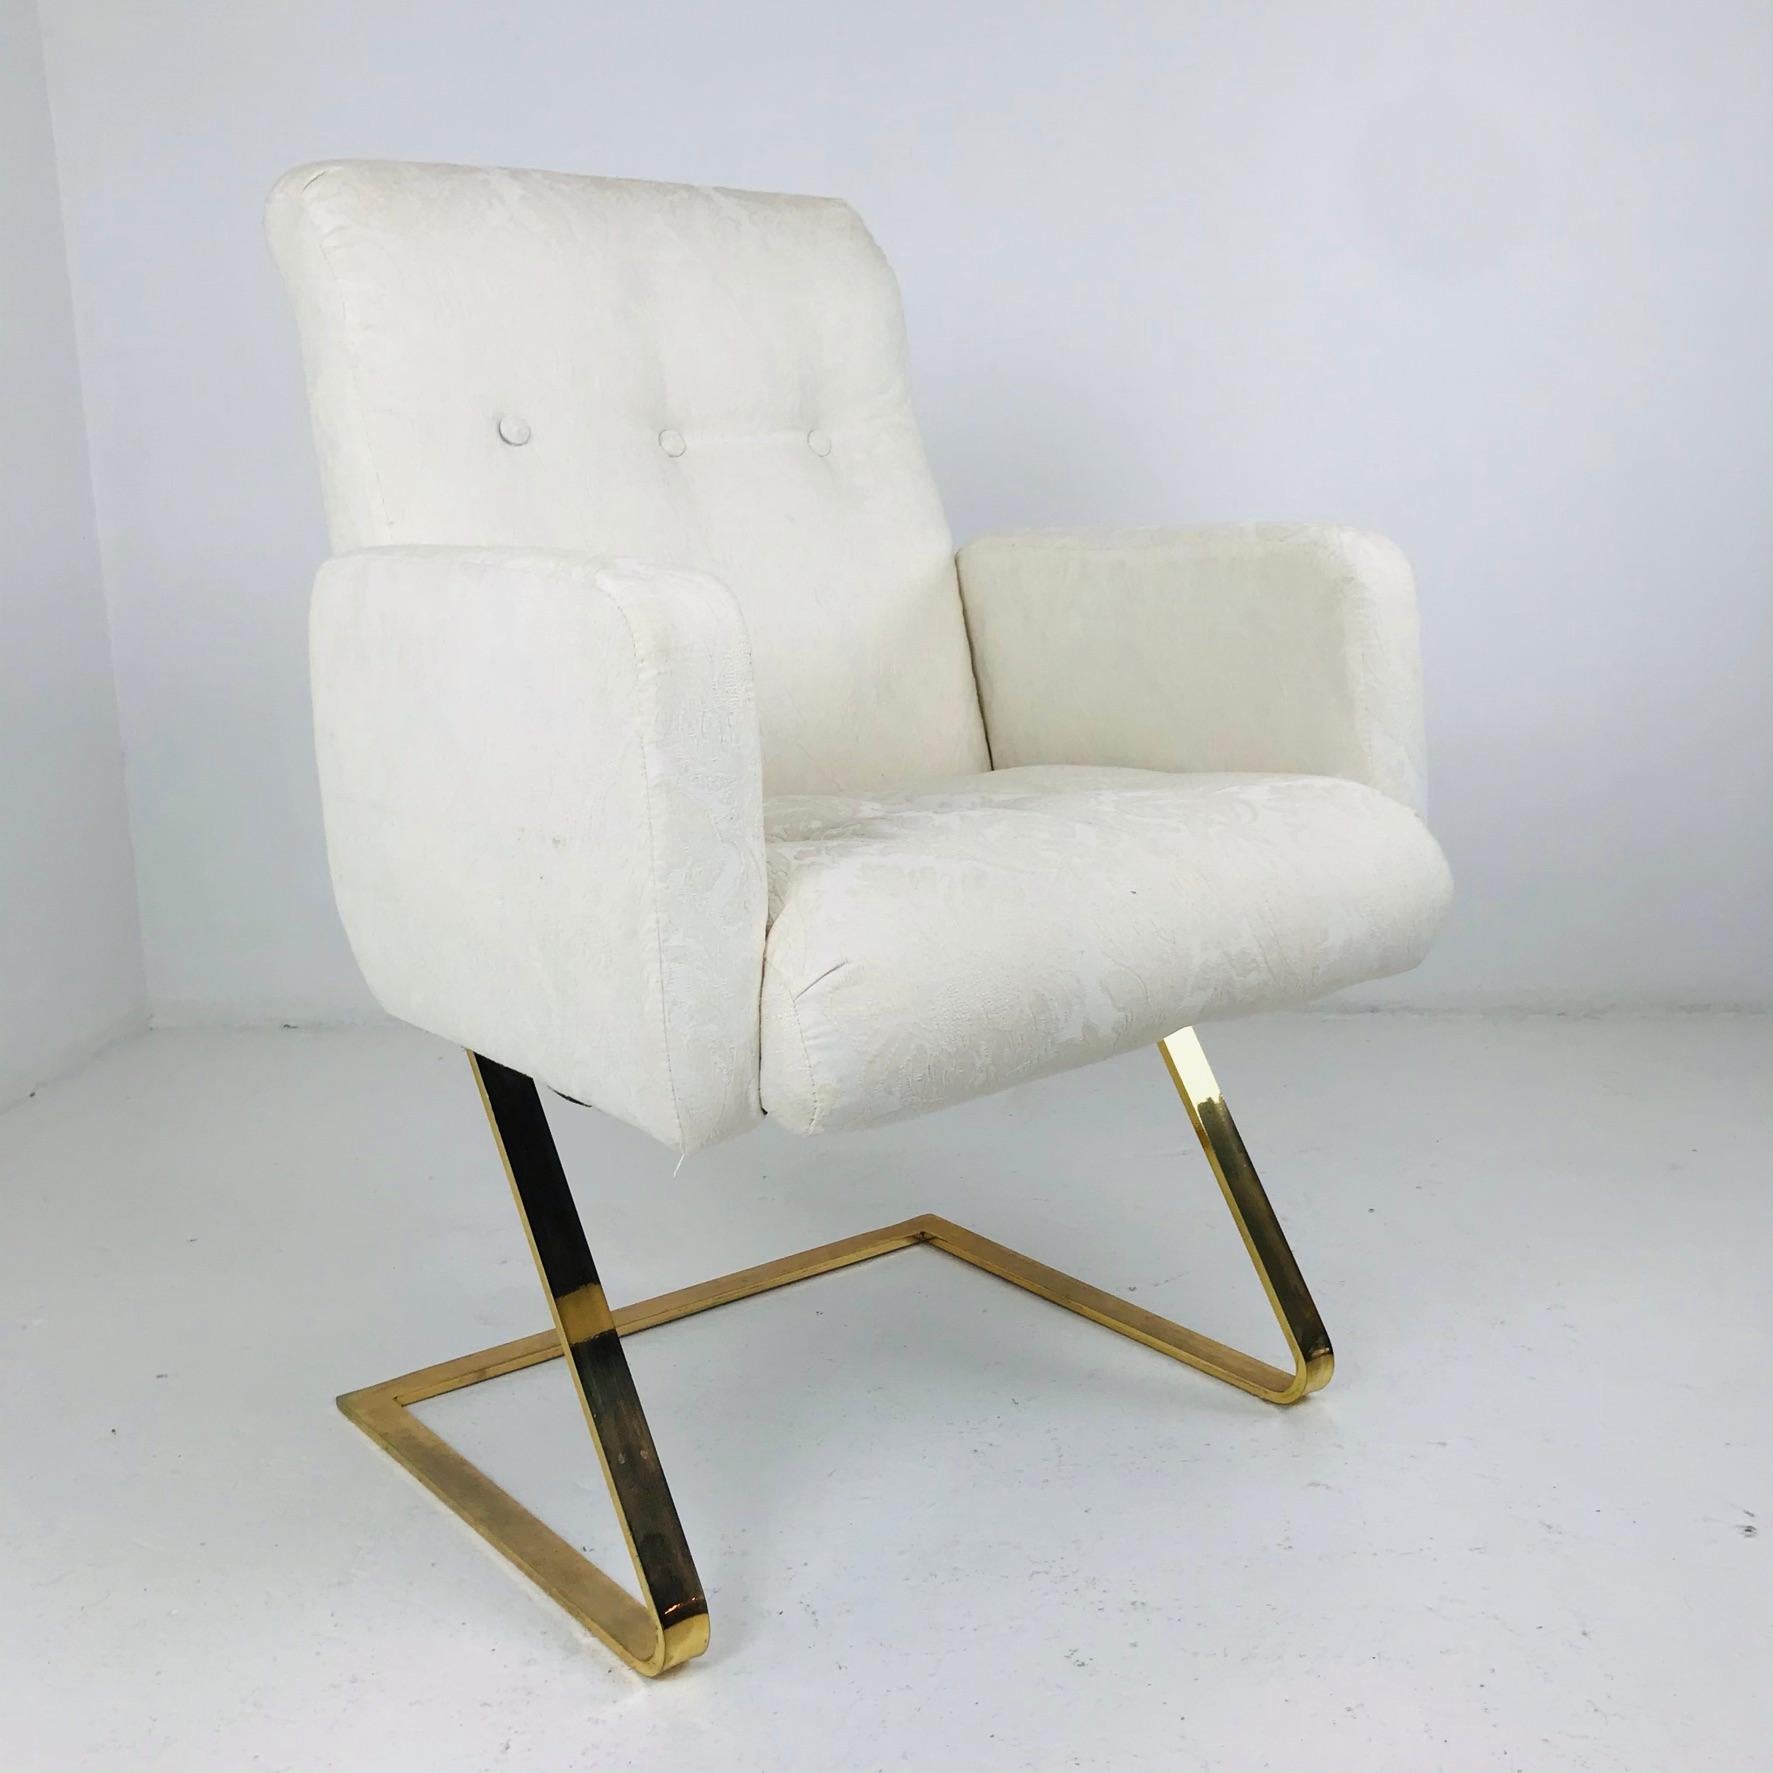 Set of 6 DIA Brass Cantilever Chairs 1